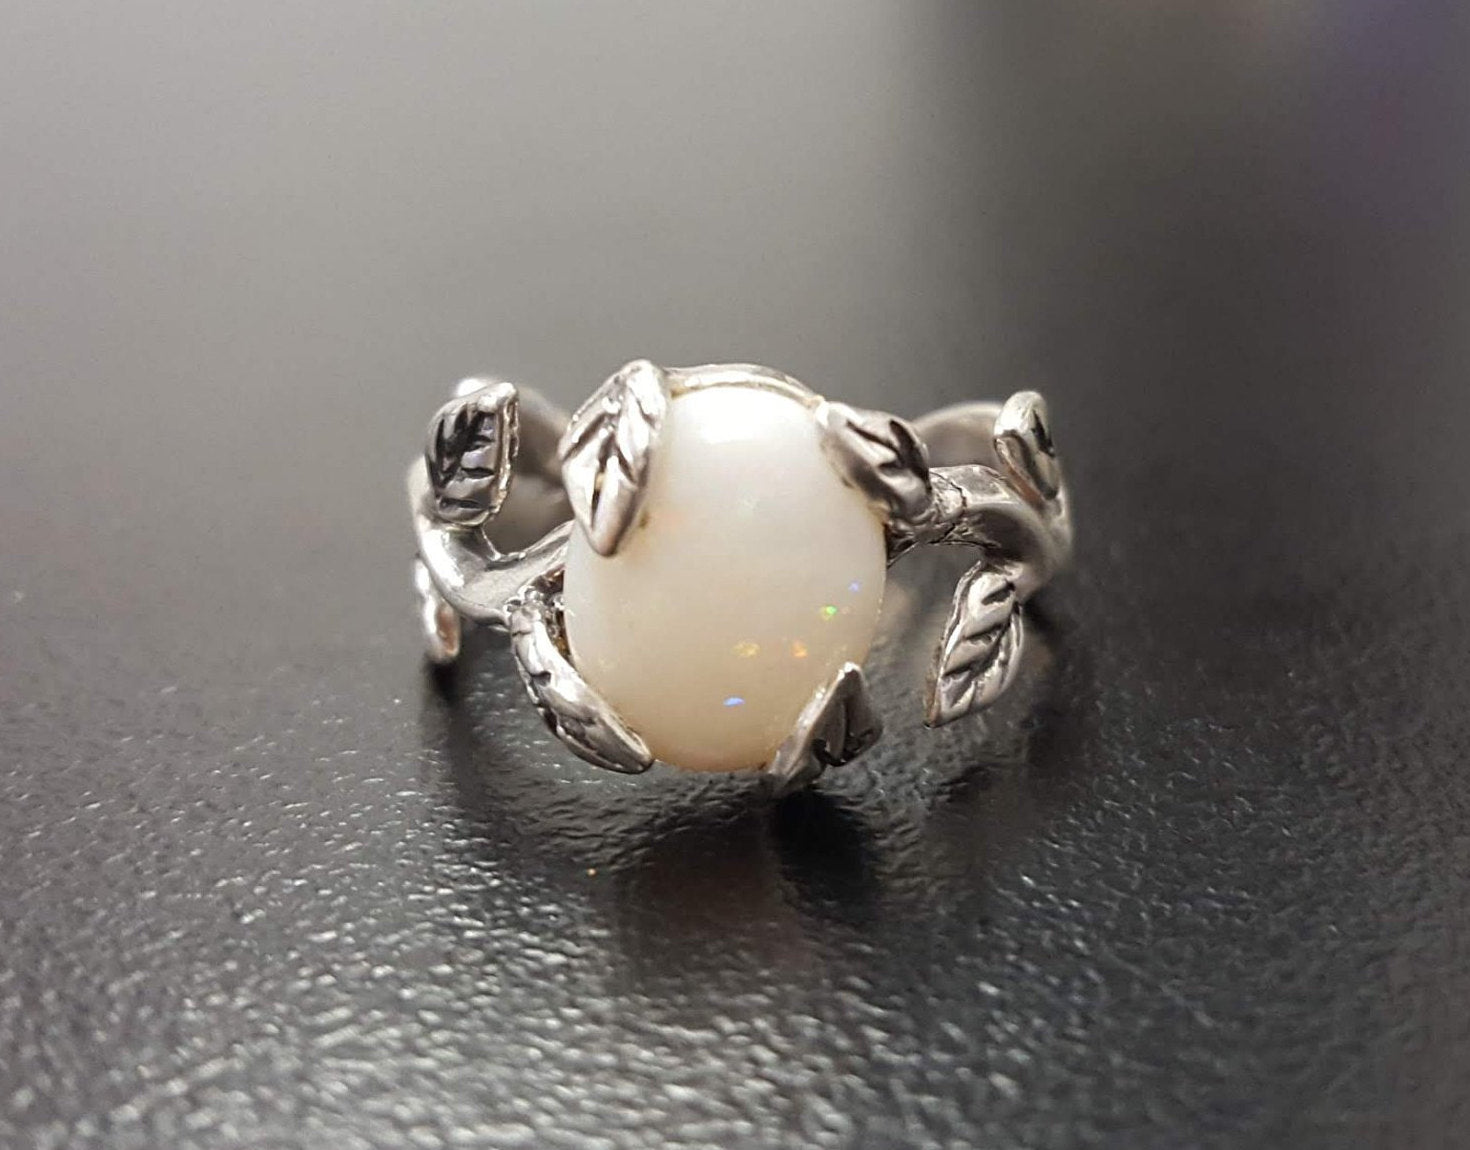 Fire Opal Ring, Natural Opal, Leaf Ring, Australian Opal Ring, Opal Ring, Branch Ring, White Rose Ring, Opal Flower Ring, Solid Silver Ring